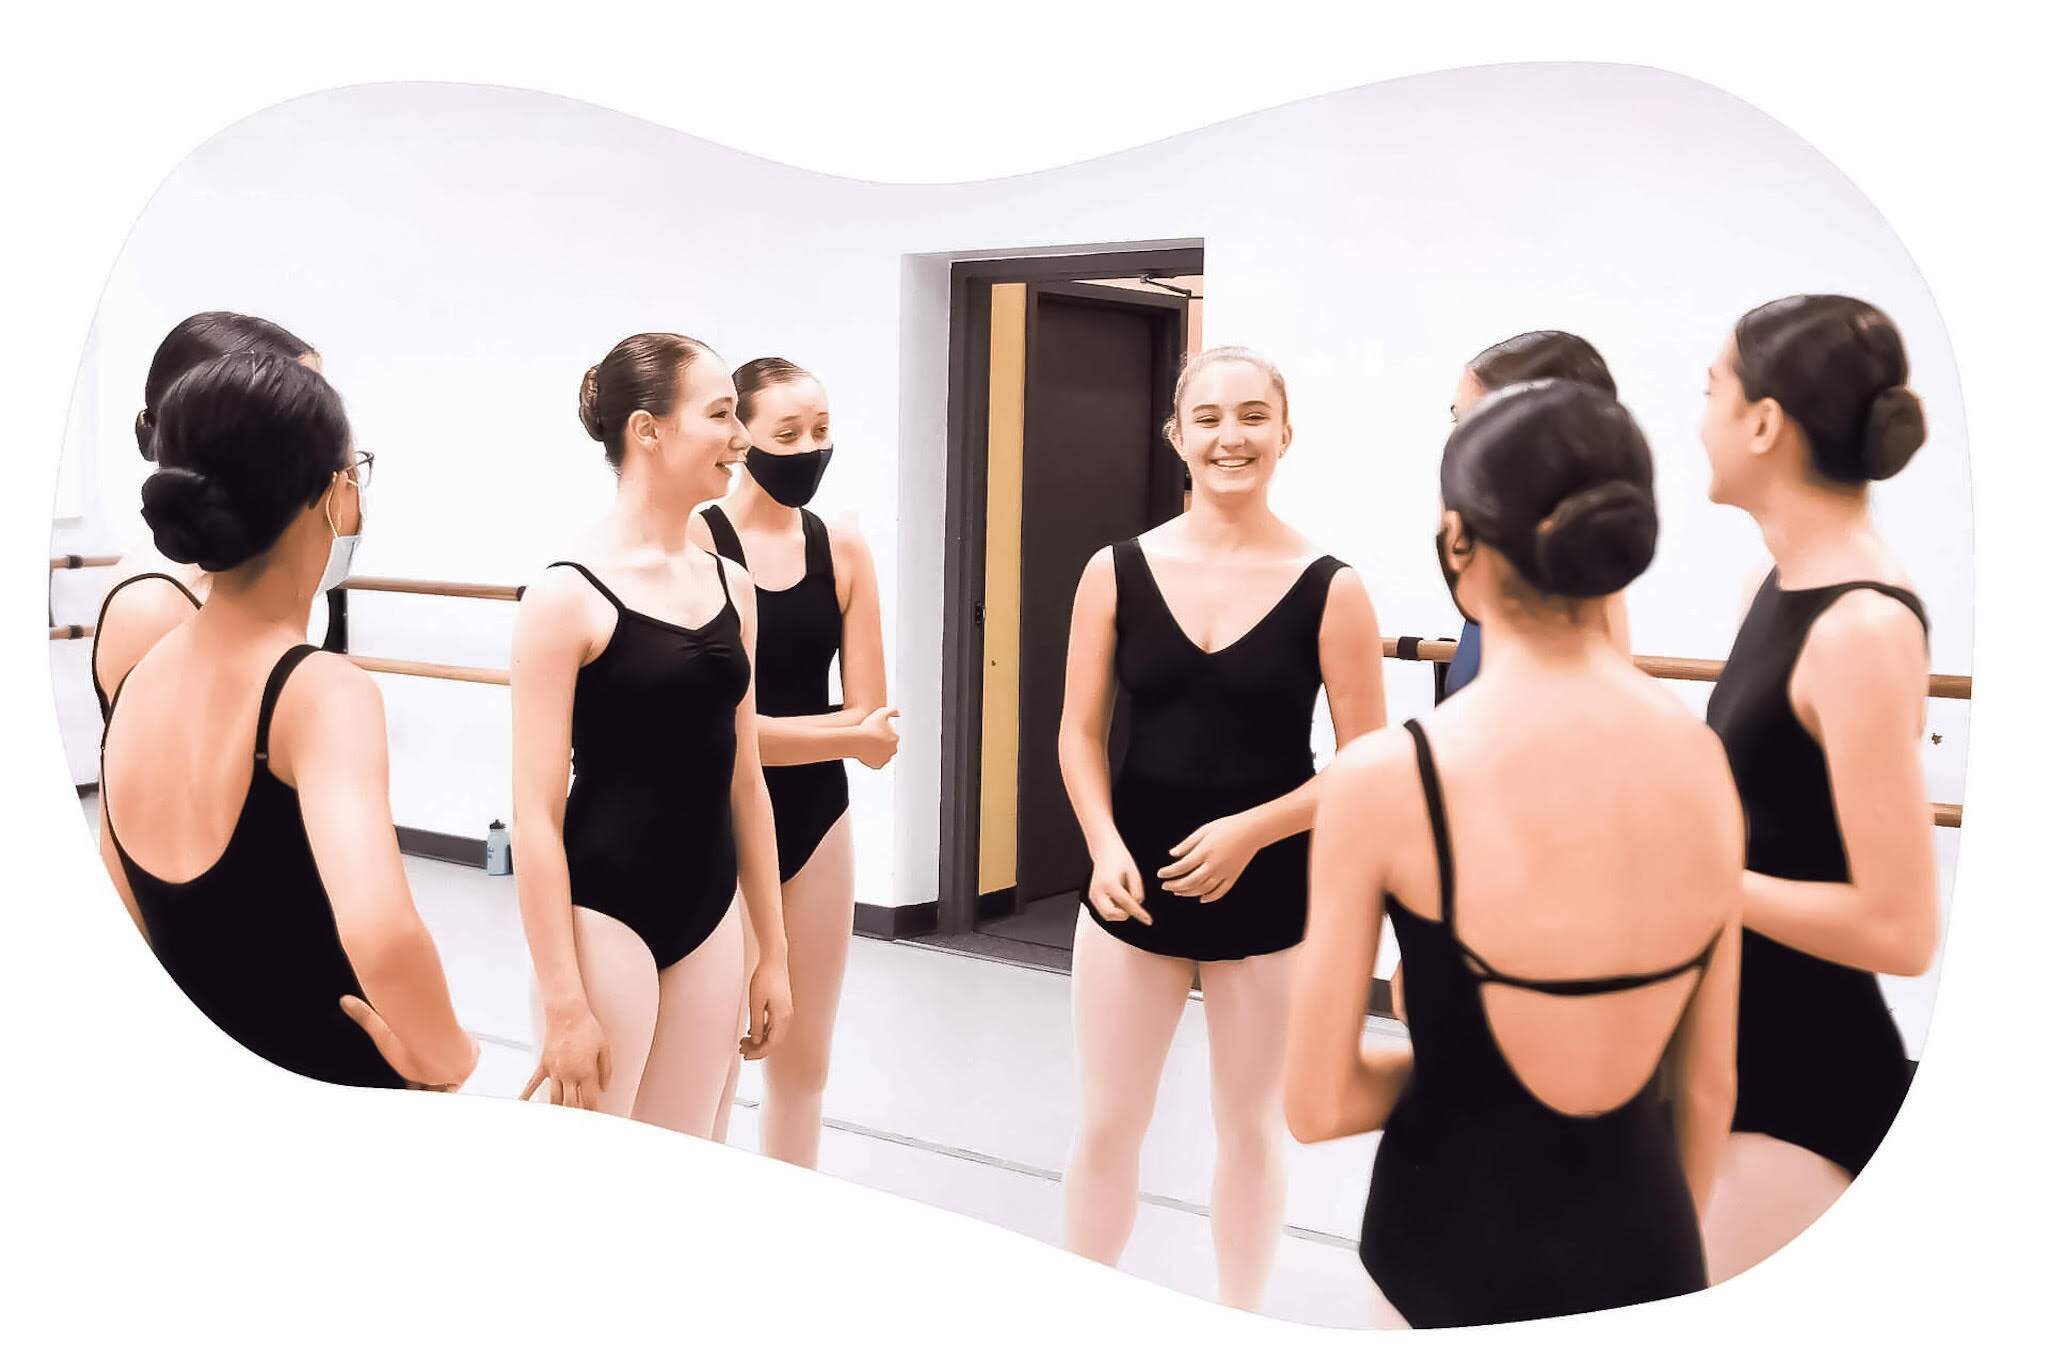 A group of ballerinas talking to each other in a ballet studio